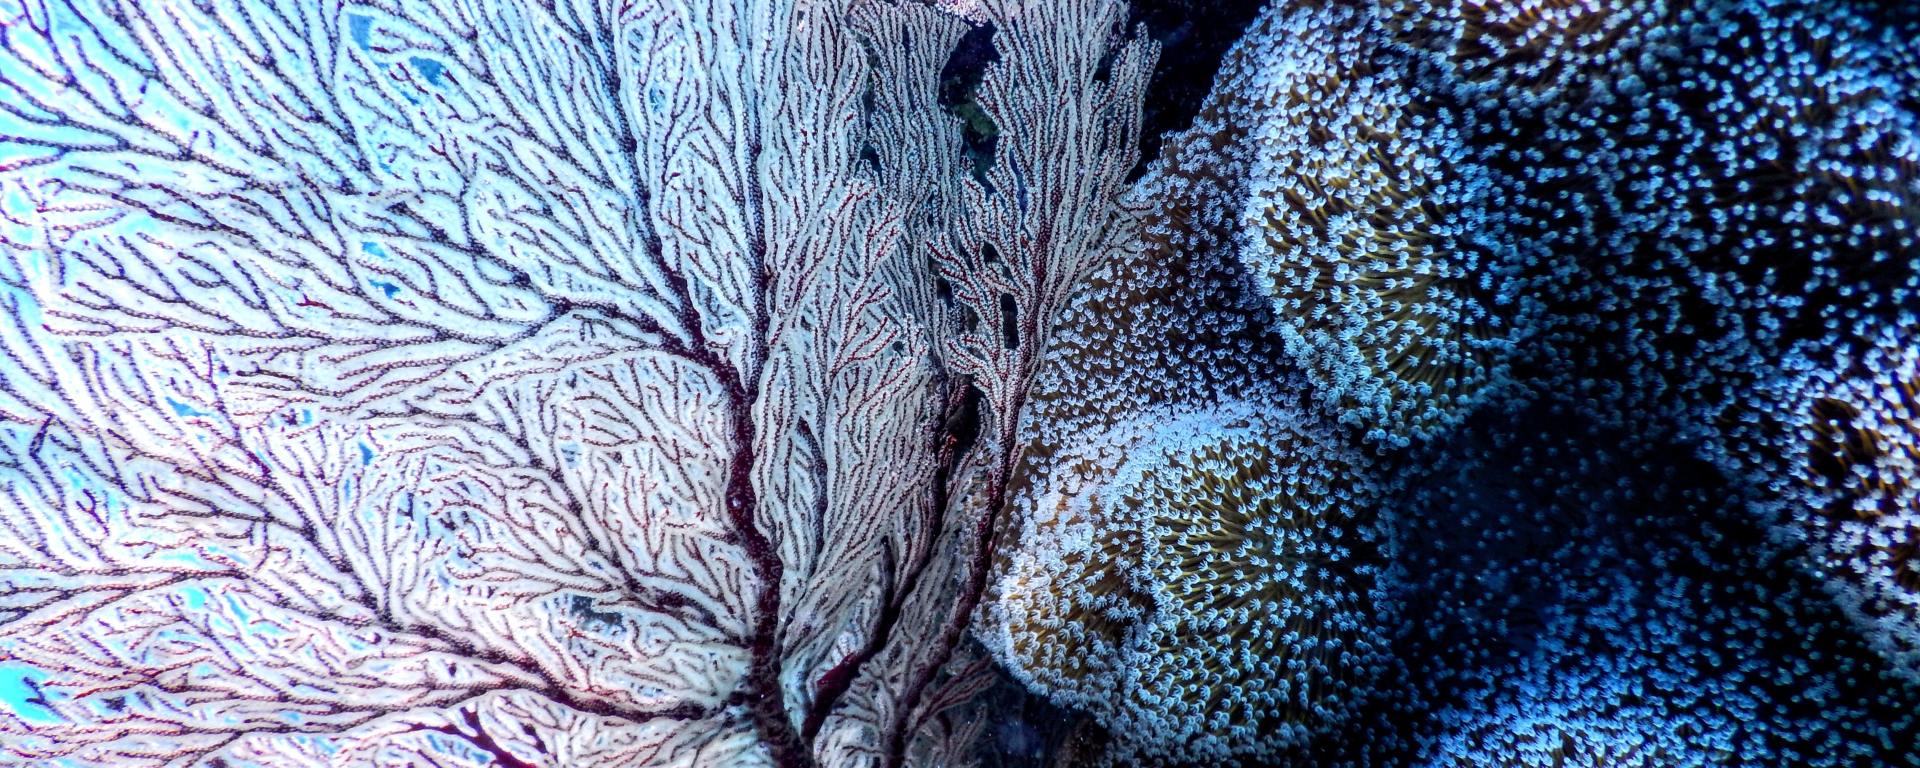 Living corals showing abstract shapes